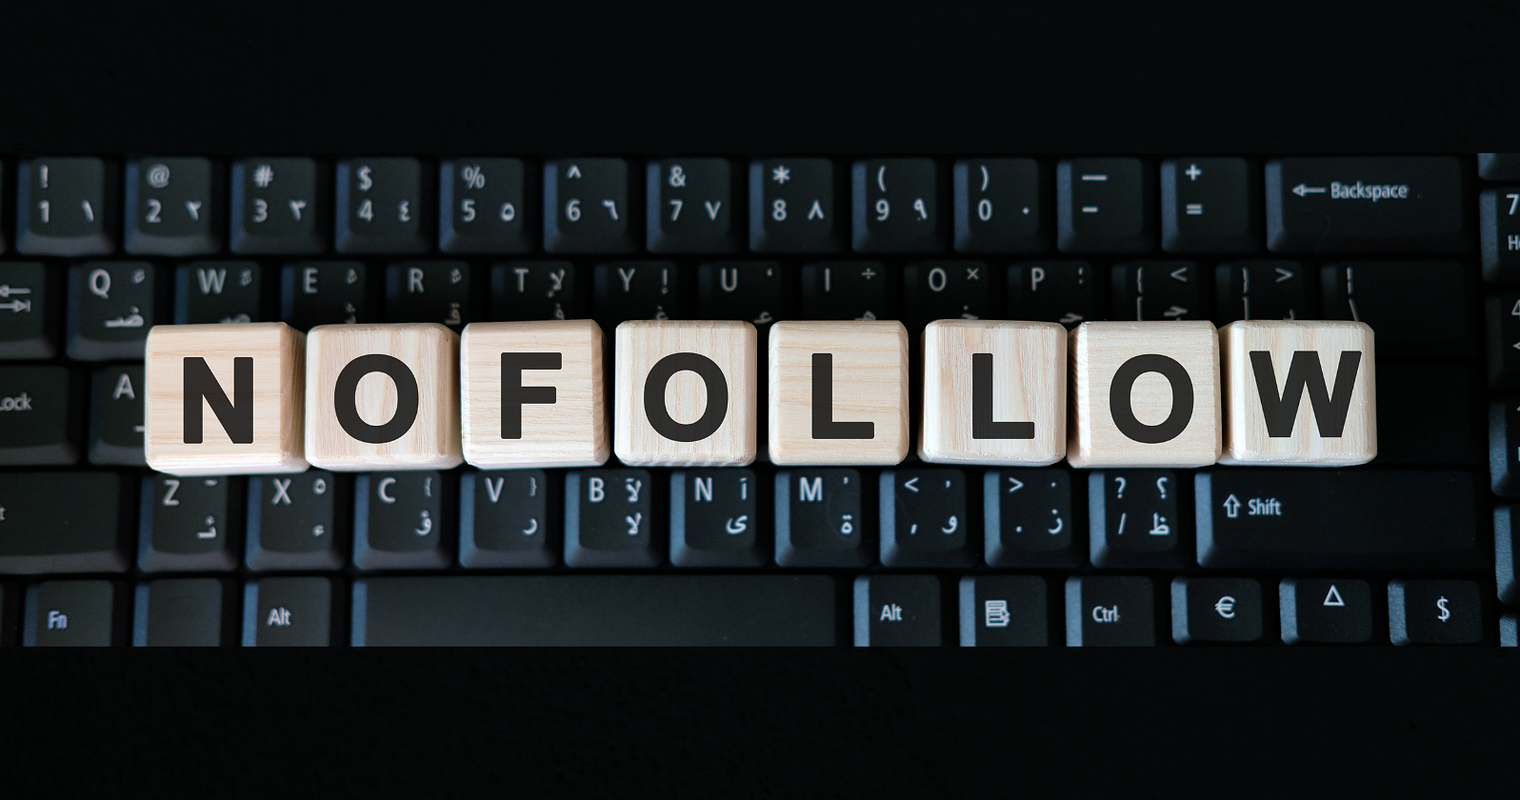 When to Use Nofollow on Links & When Not To